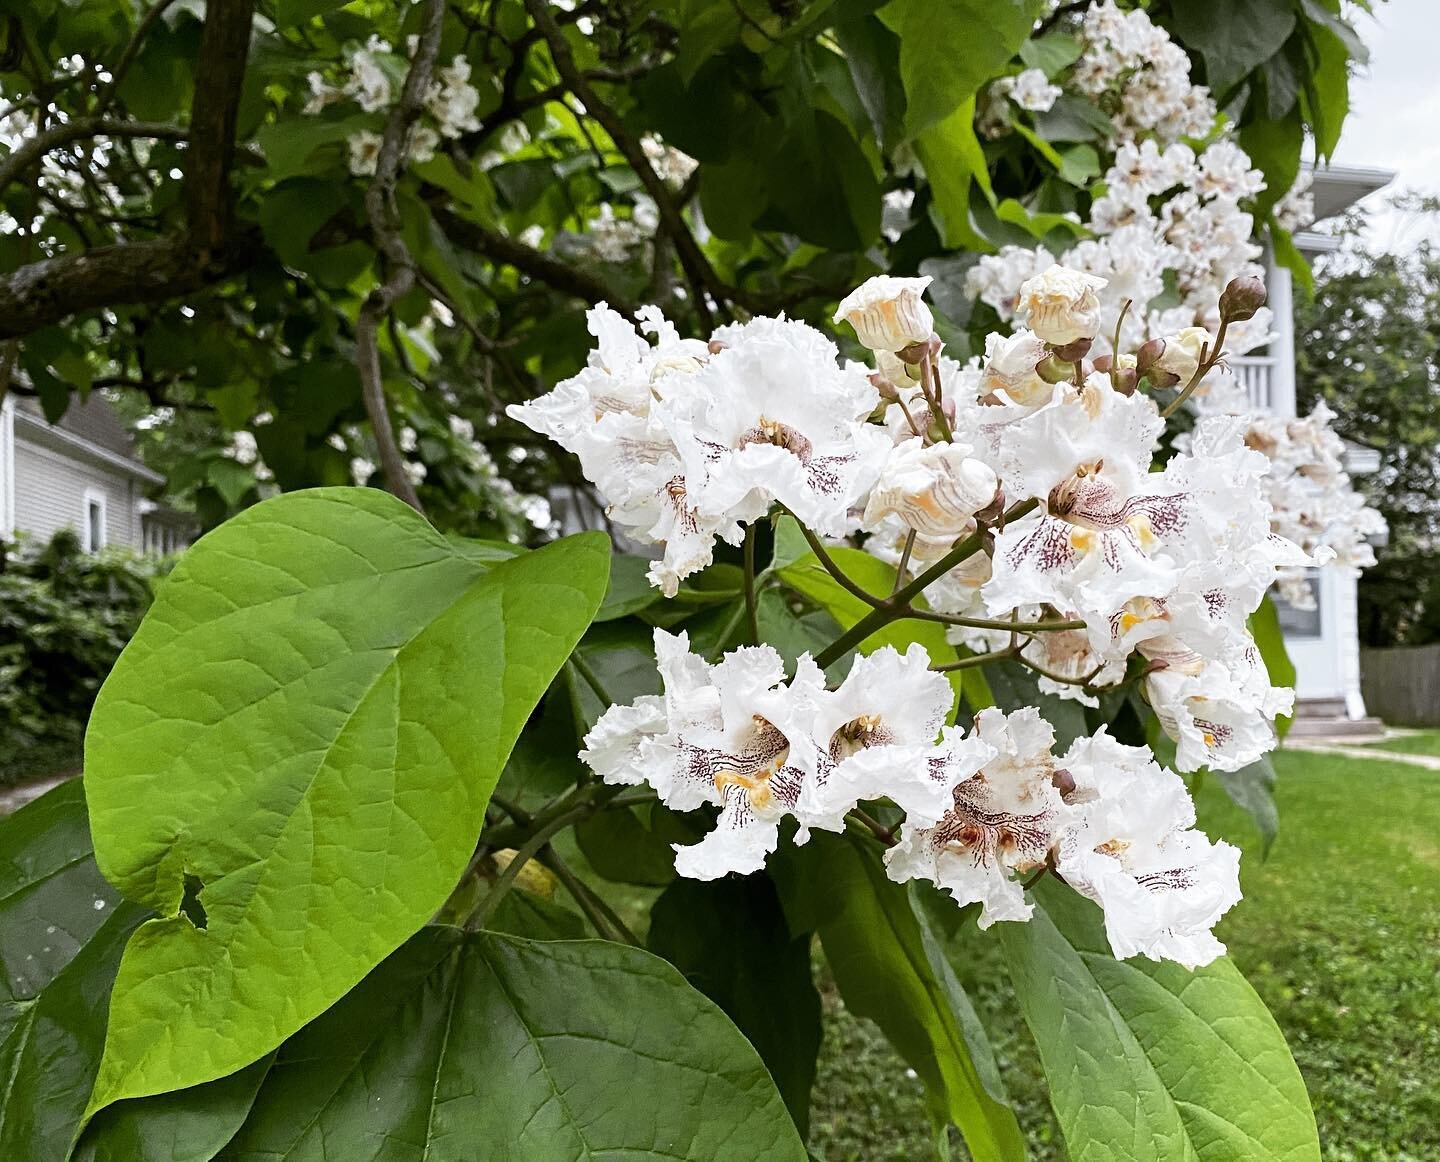 All aspects of the #catalpa tree are #magnificent